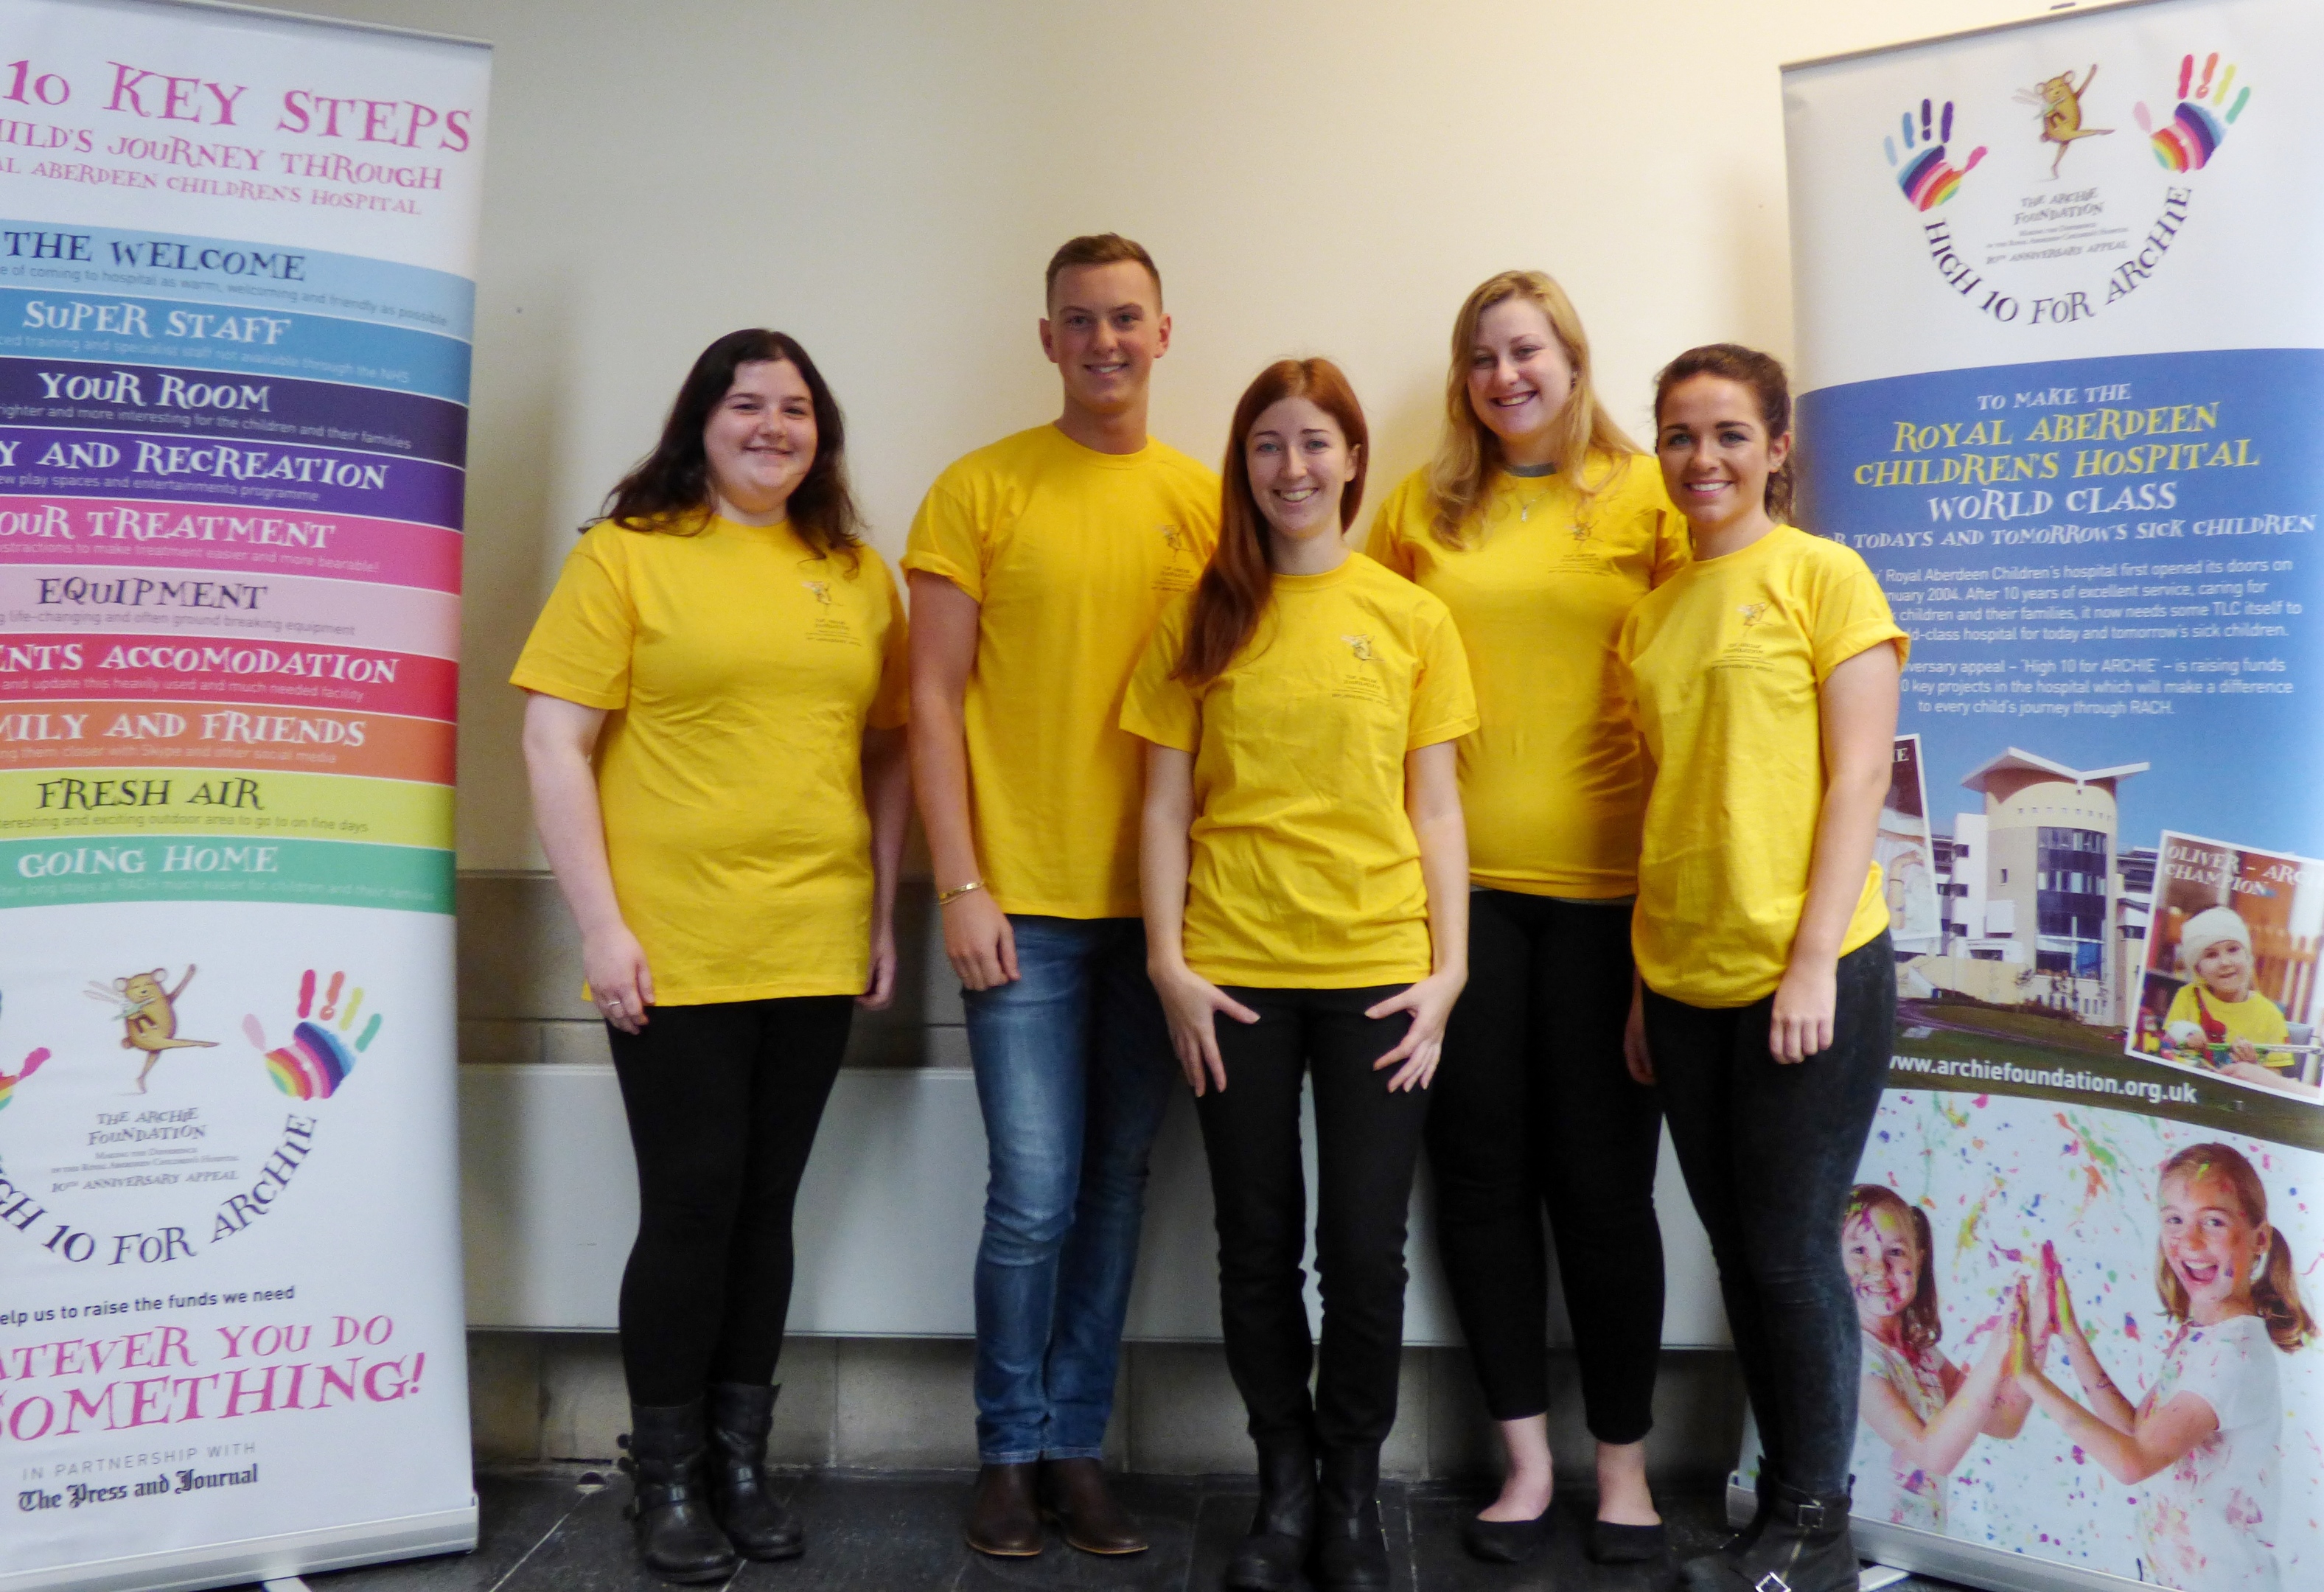 From left to right: Rowan Stewart, Will Wilkie, charity mentor Emma Slesser, Catriona Fox and Sarah Anderson. The team are fundraising for Archie's parent's accommodation.